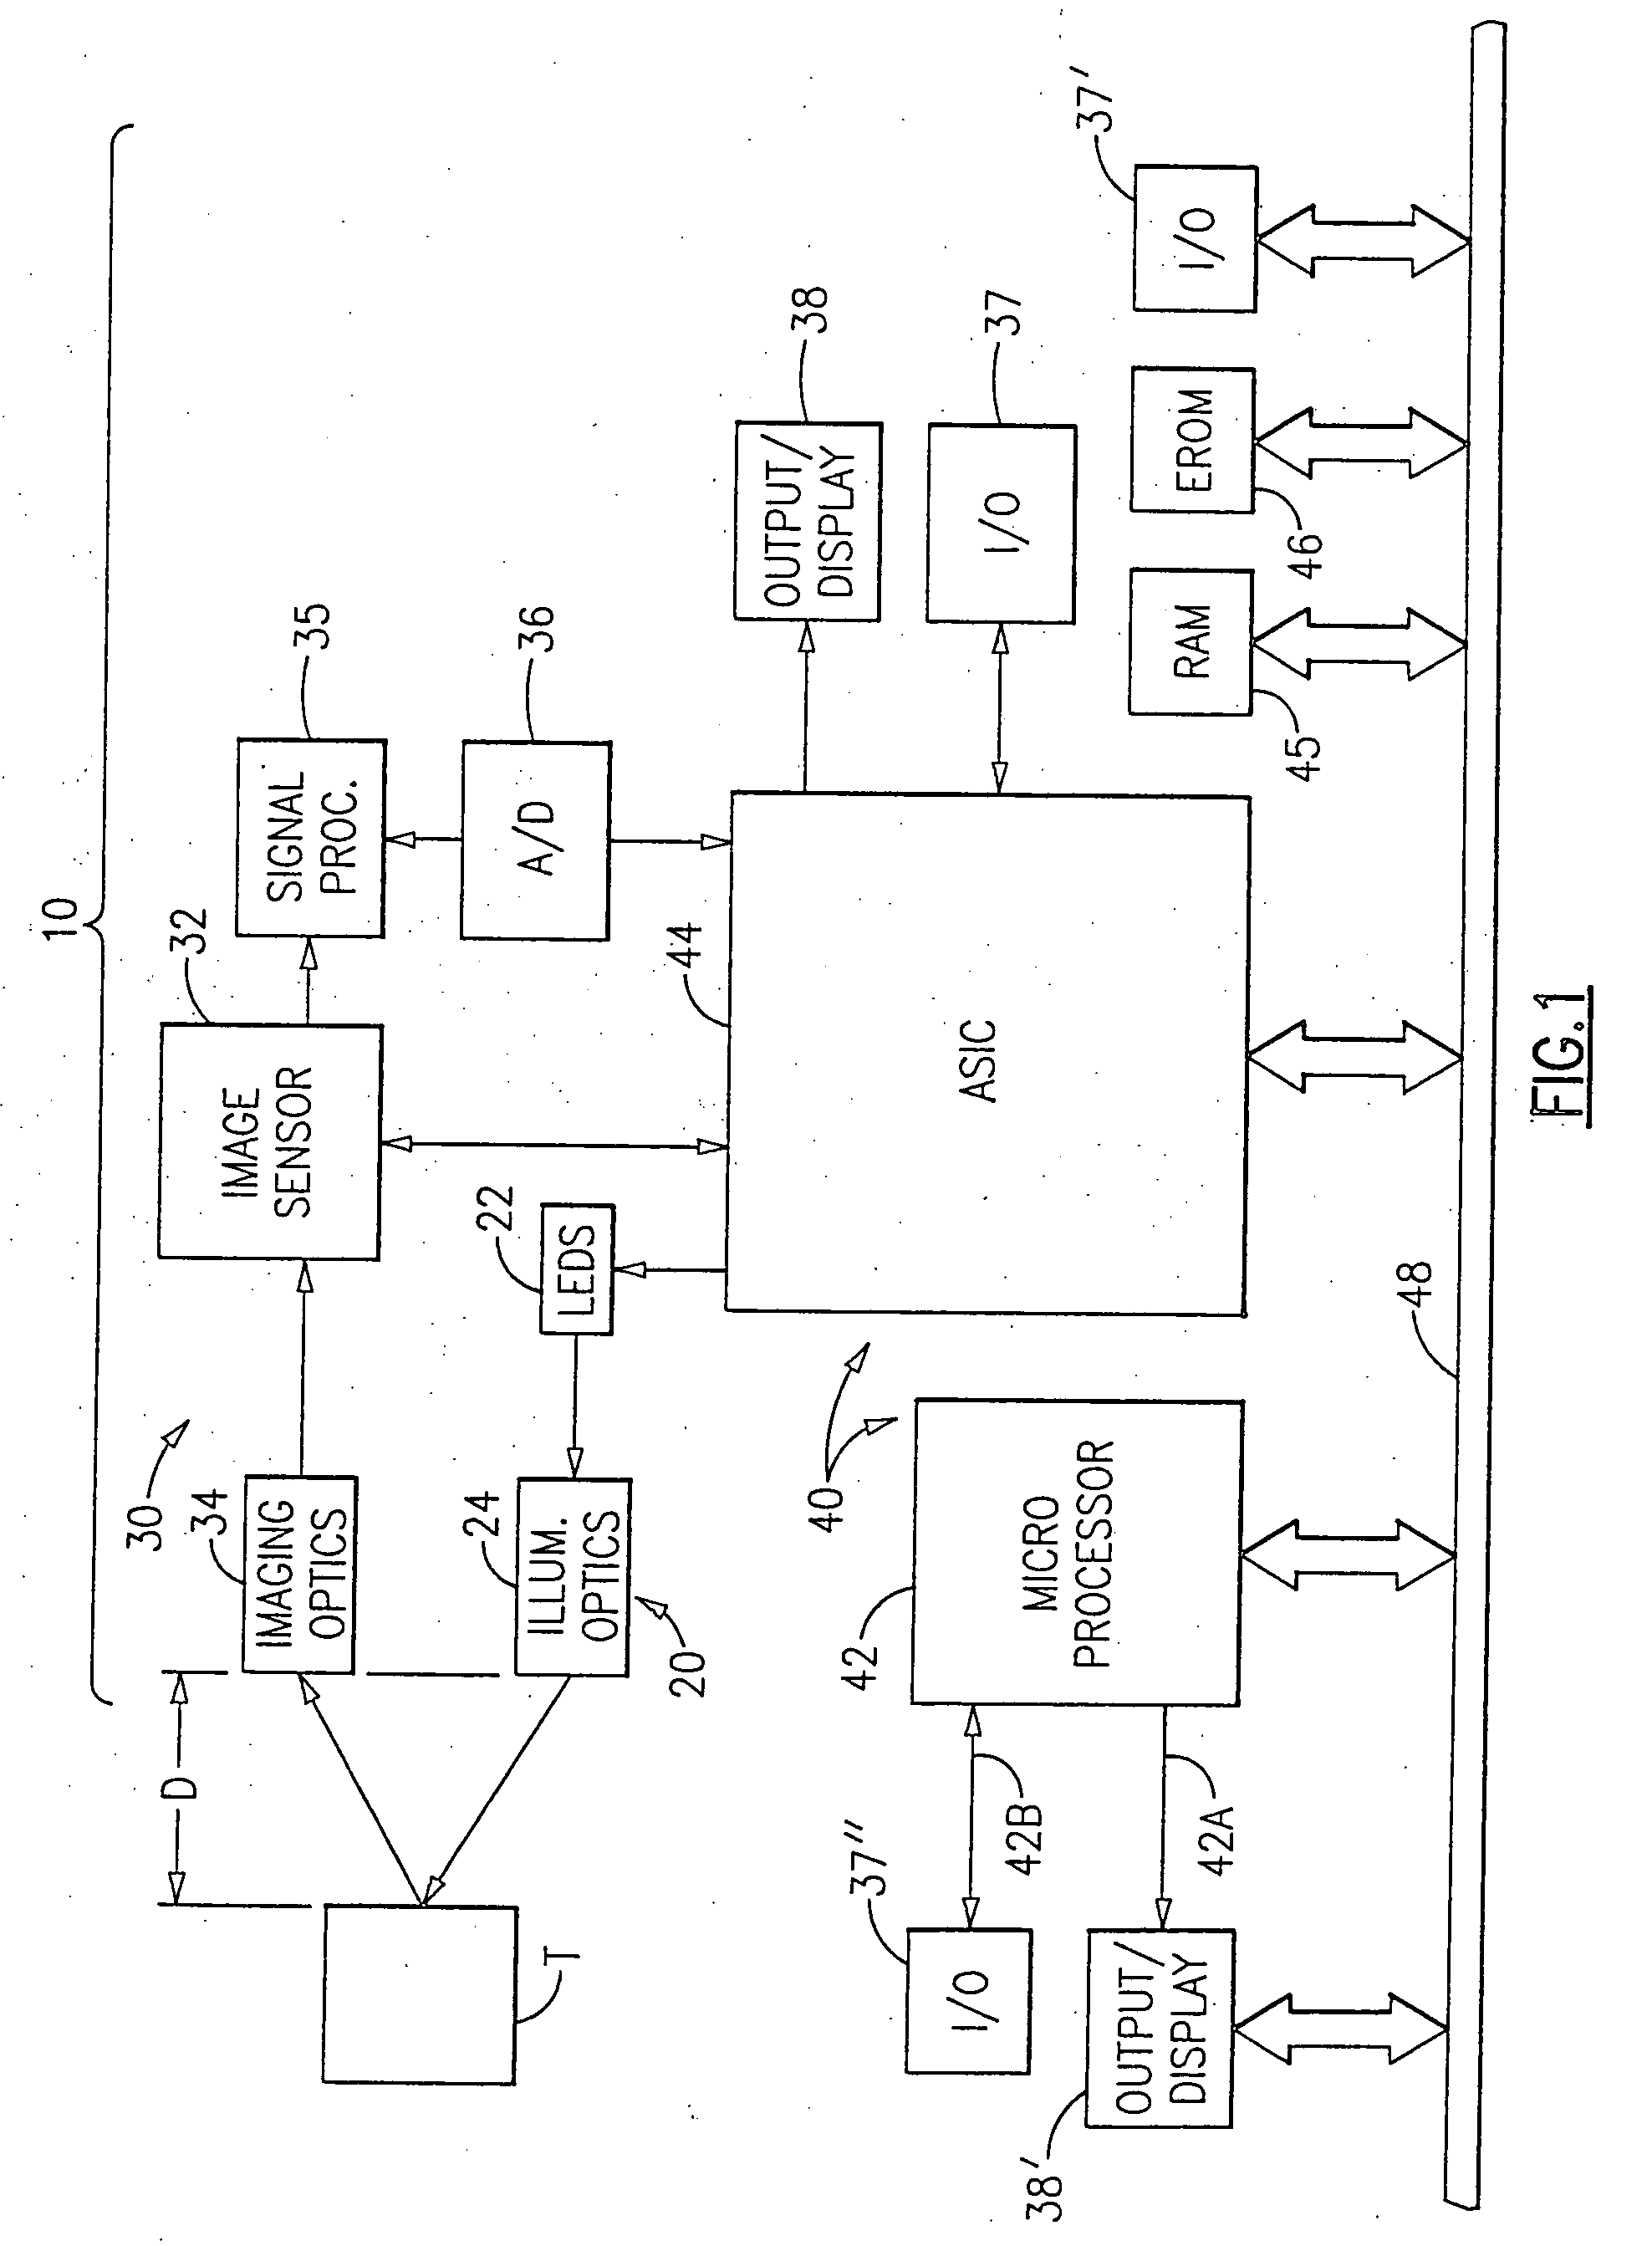 Optical reader comprising illumination assembly and solid state image sensor